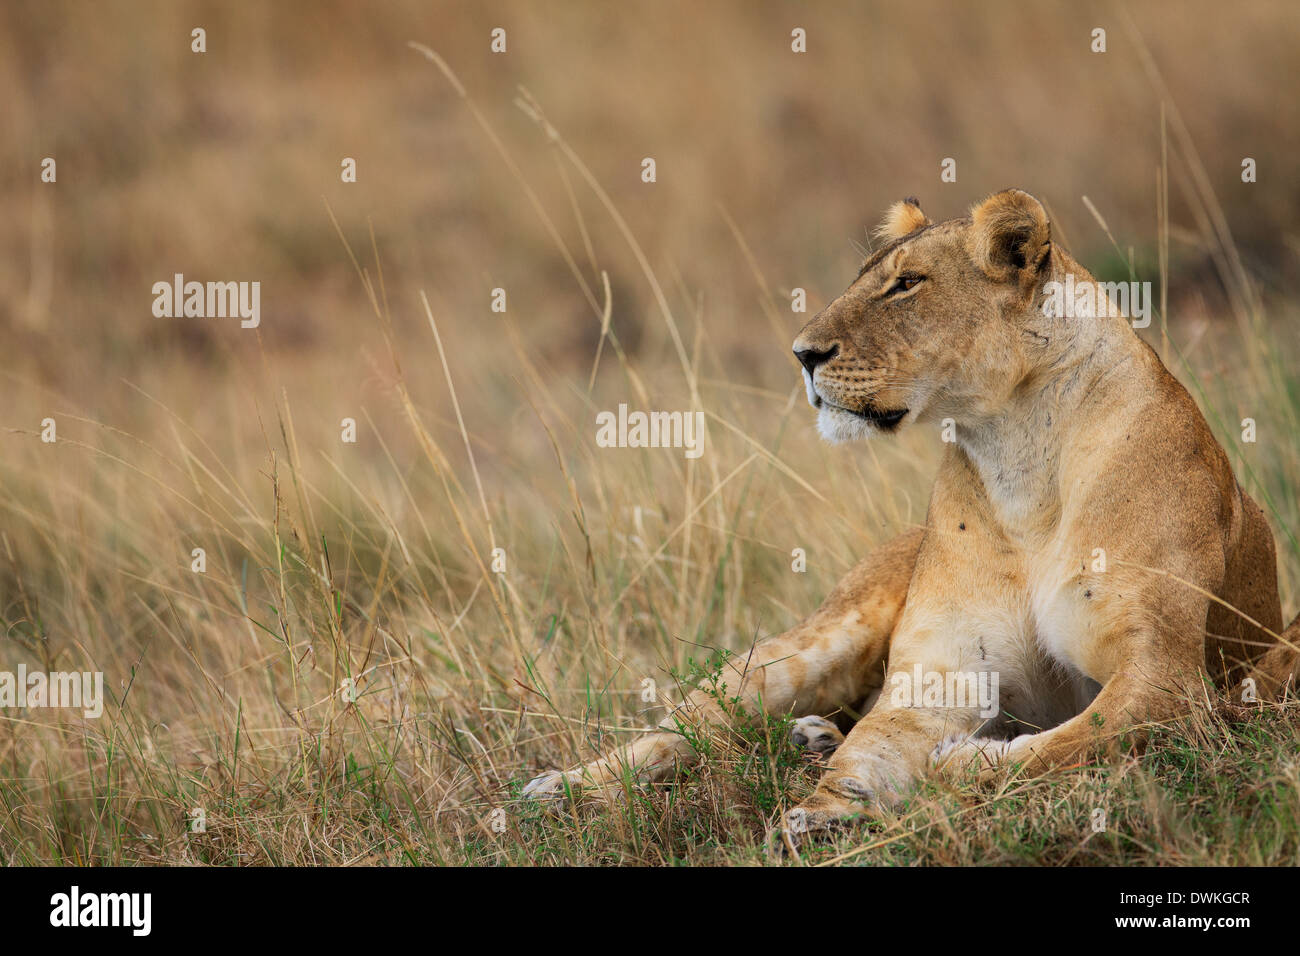 Resting lioness in grass Stock Photo